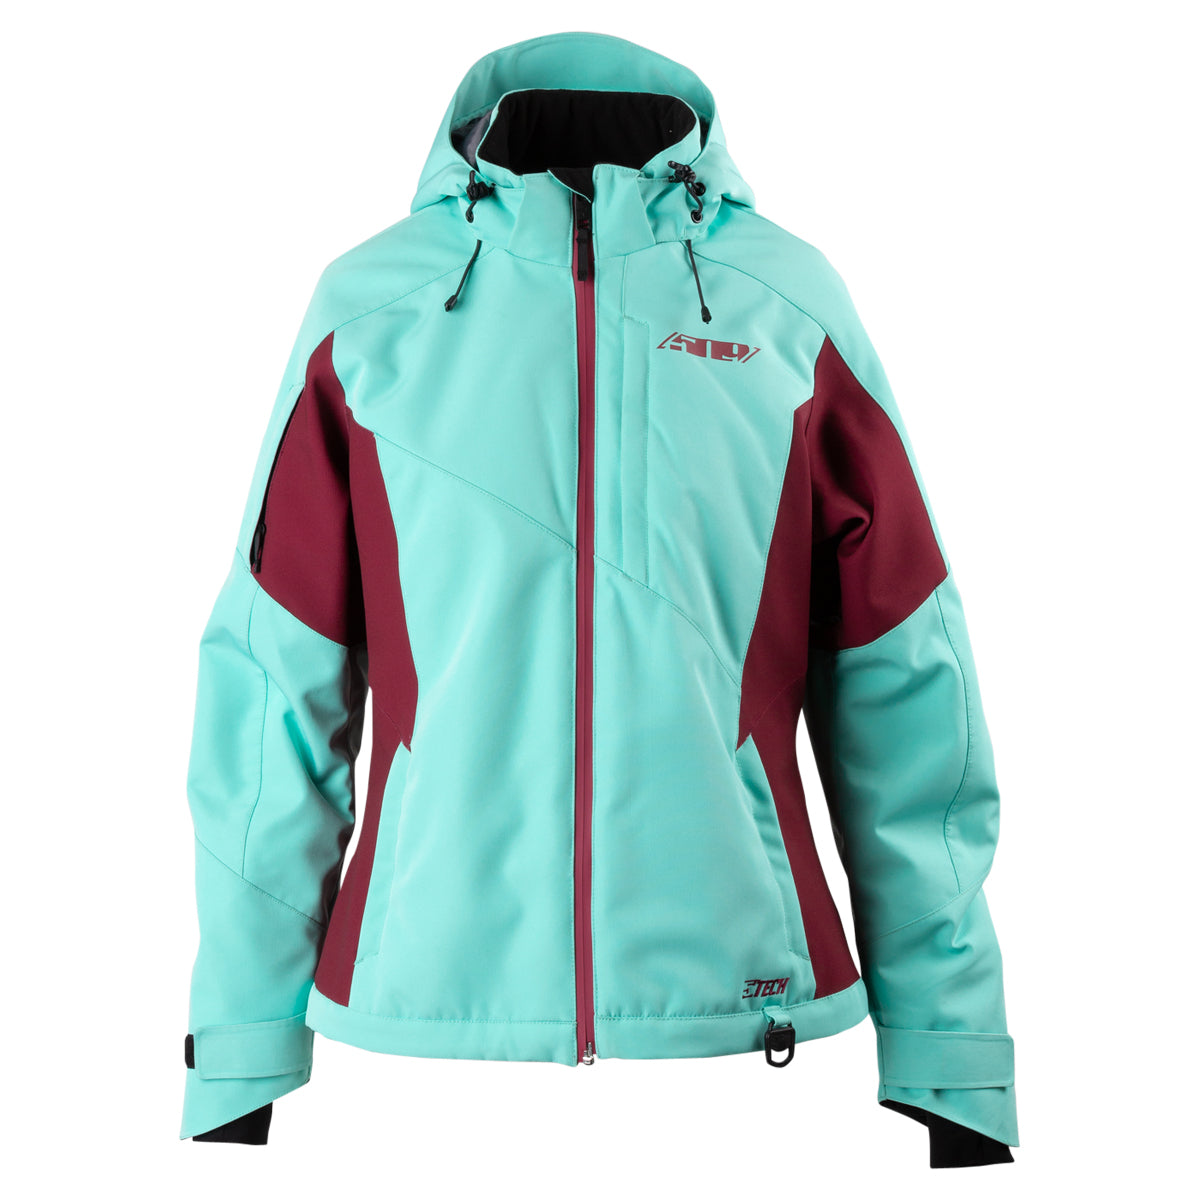 509 Women's Range Insulated Jacket - F03002400 - The Parts Lodge